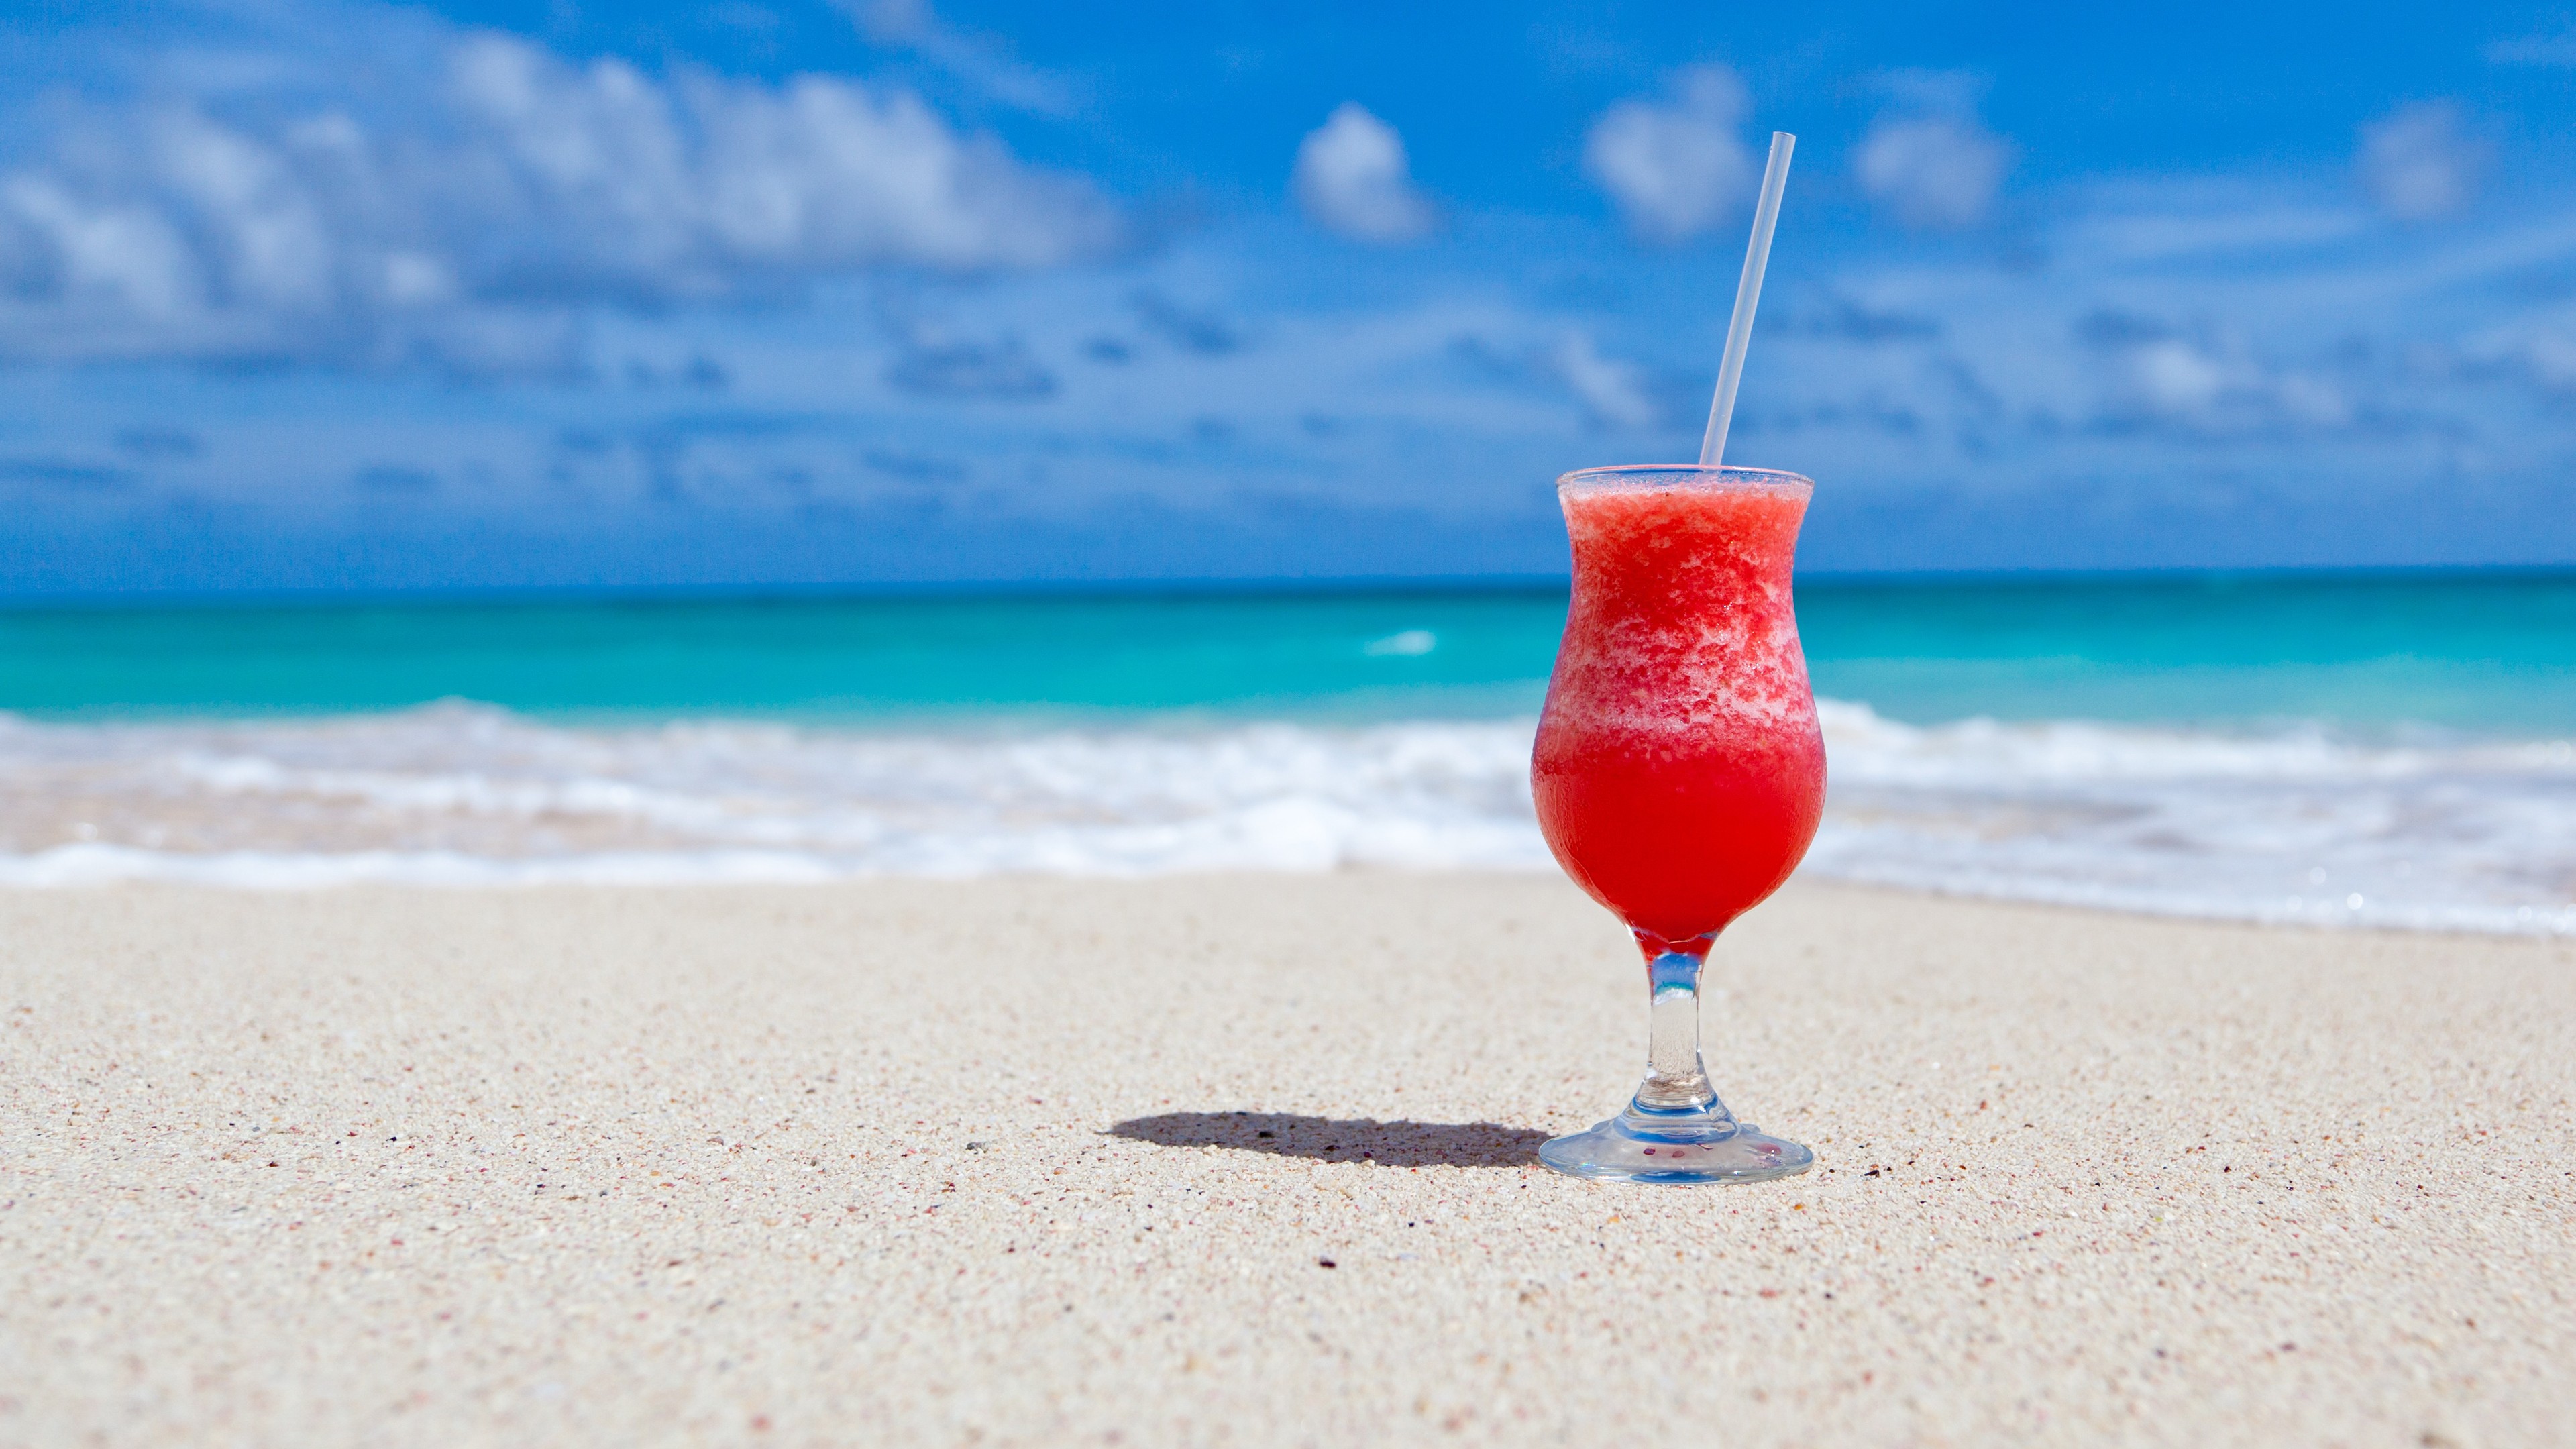 General 3840x2160 beach sand cocktails tropical drinking glass outdoors sky sea horizon